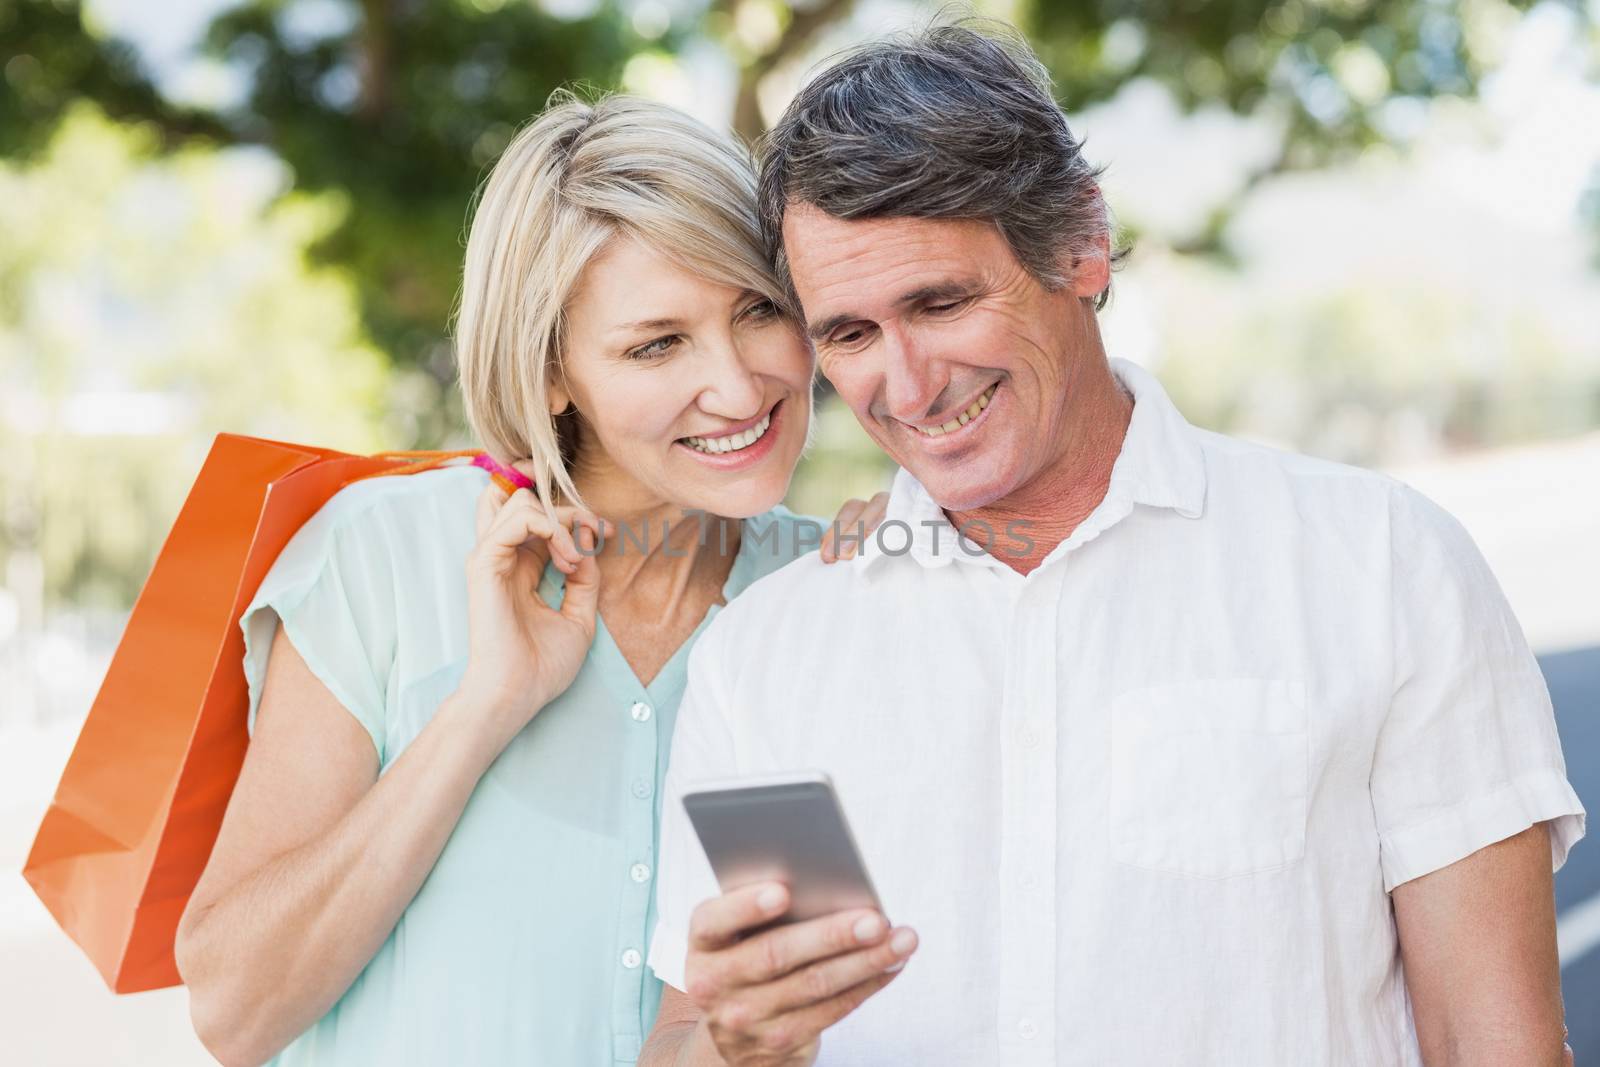 Couple using cellphone while smiling by Wavebreakmedia